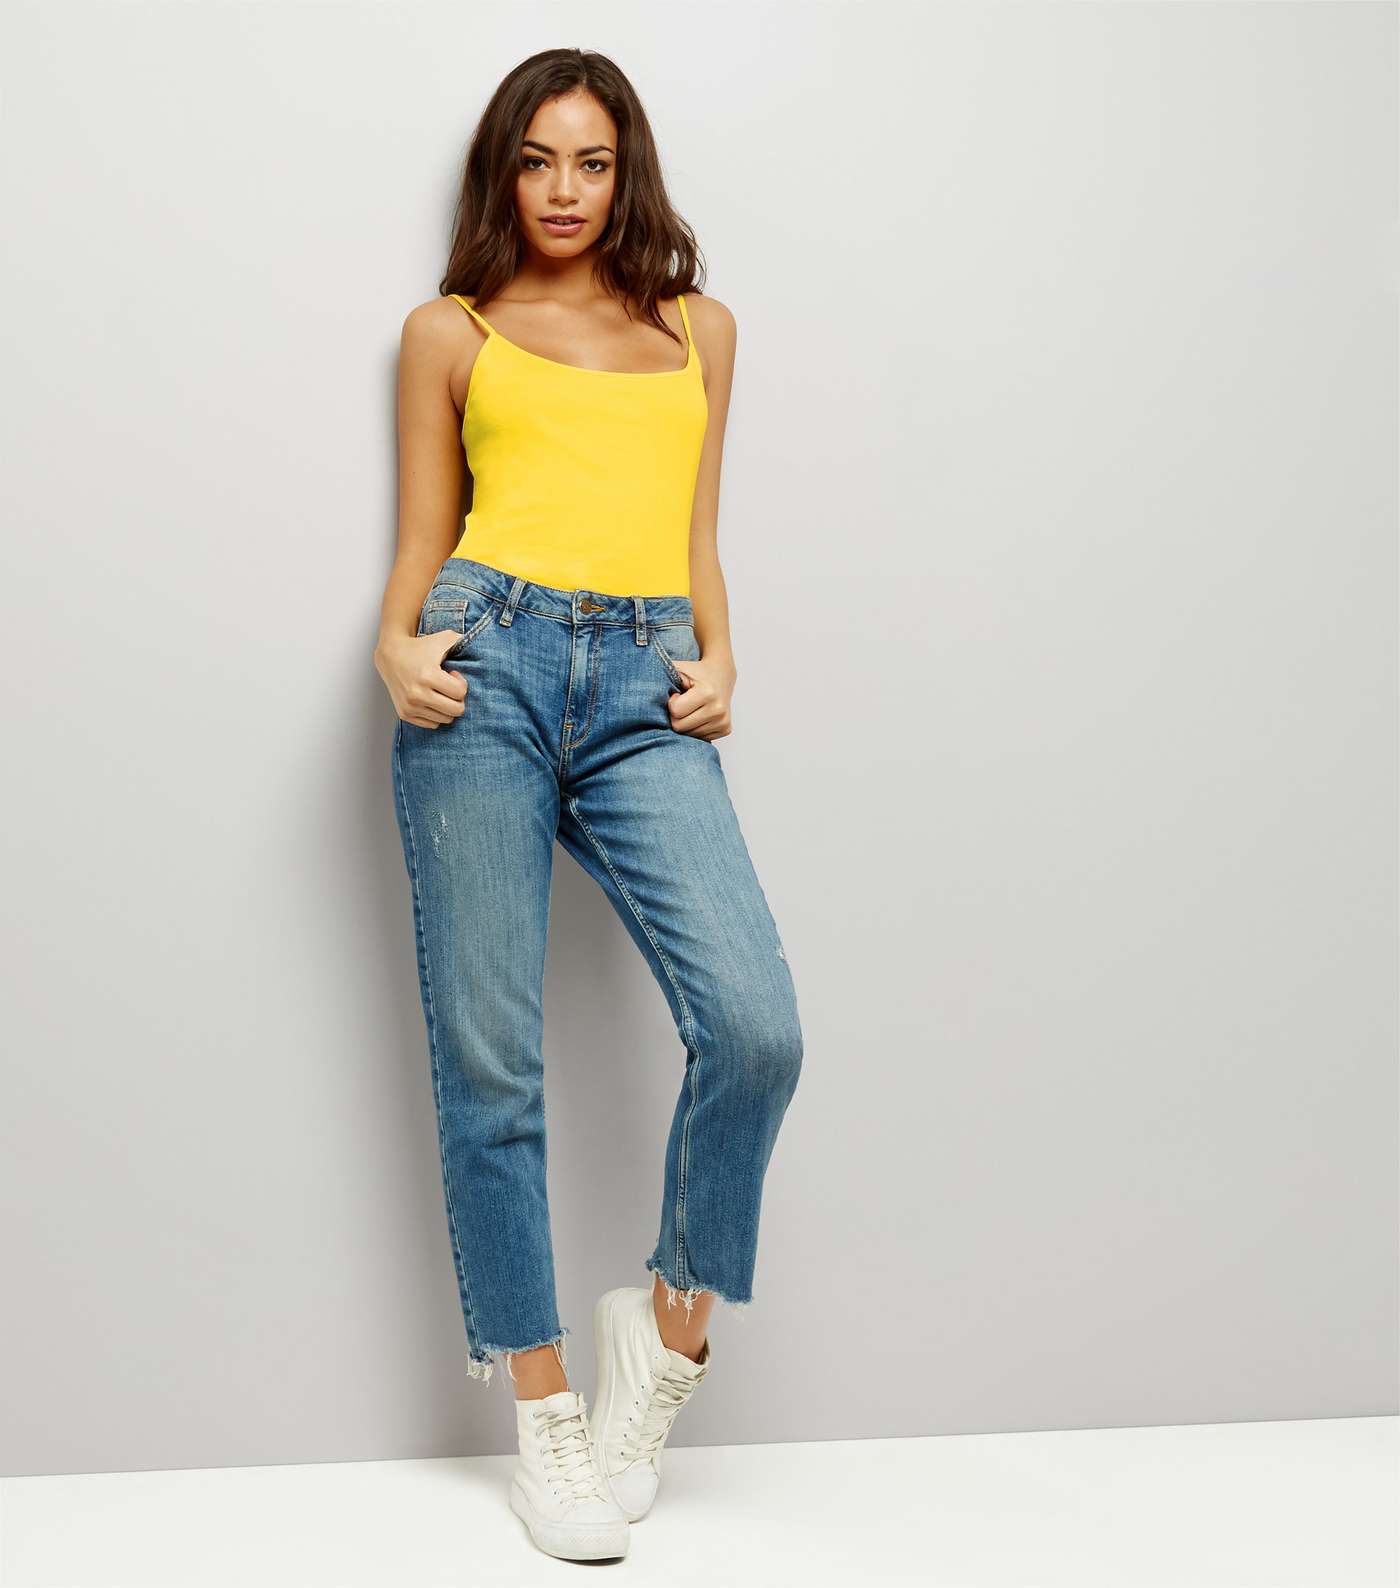 Yellow Shoestring Strap Cami Top Image 2